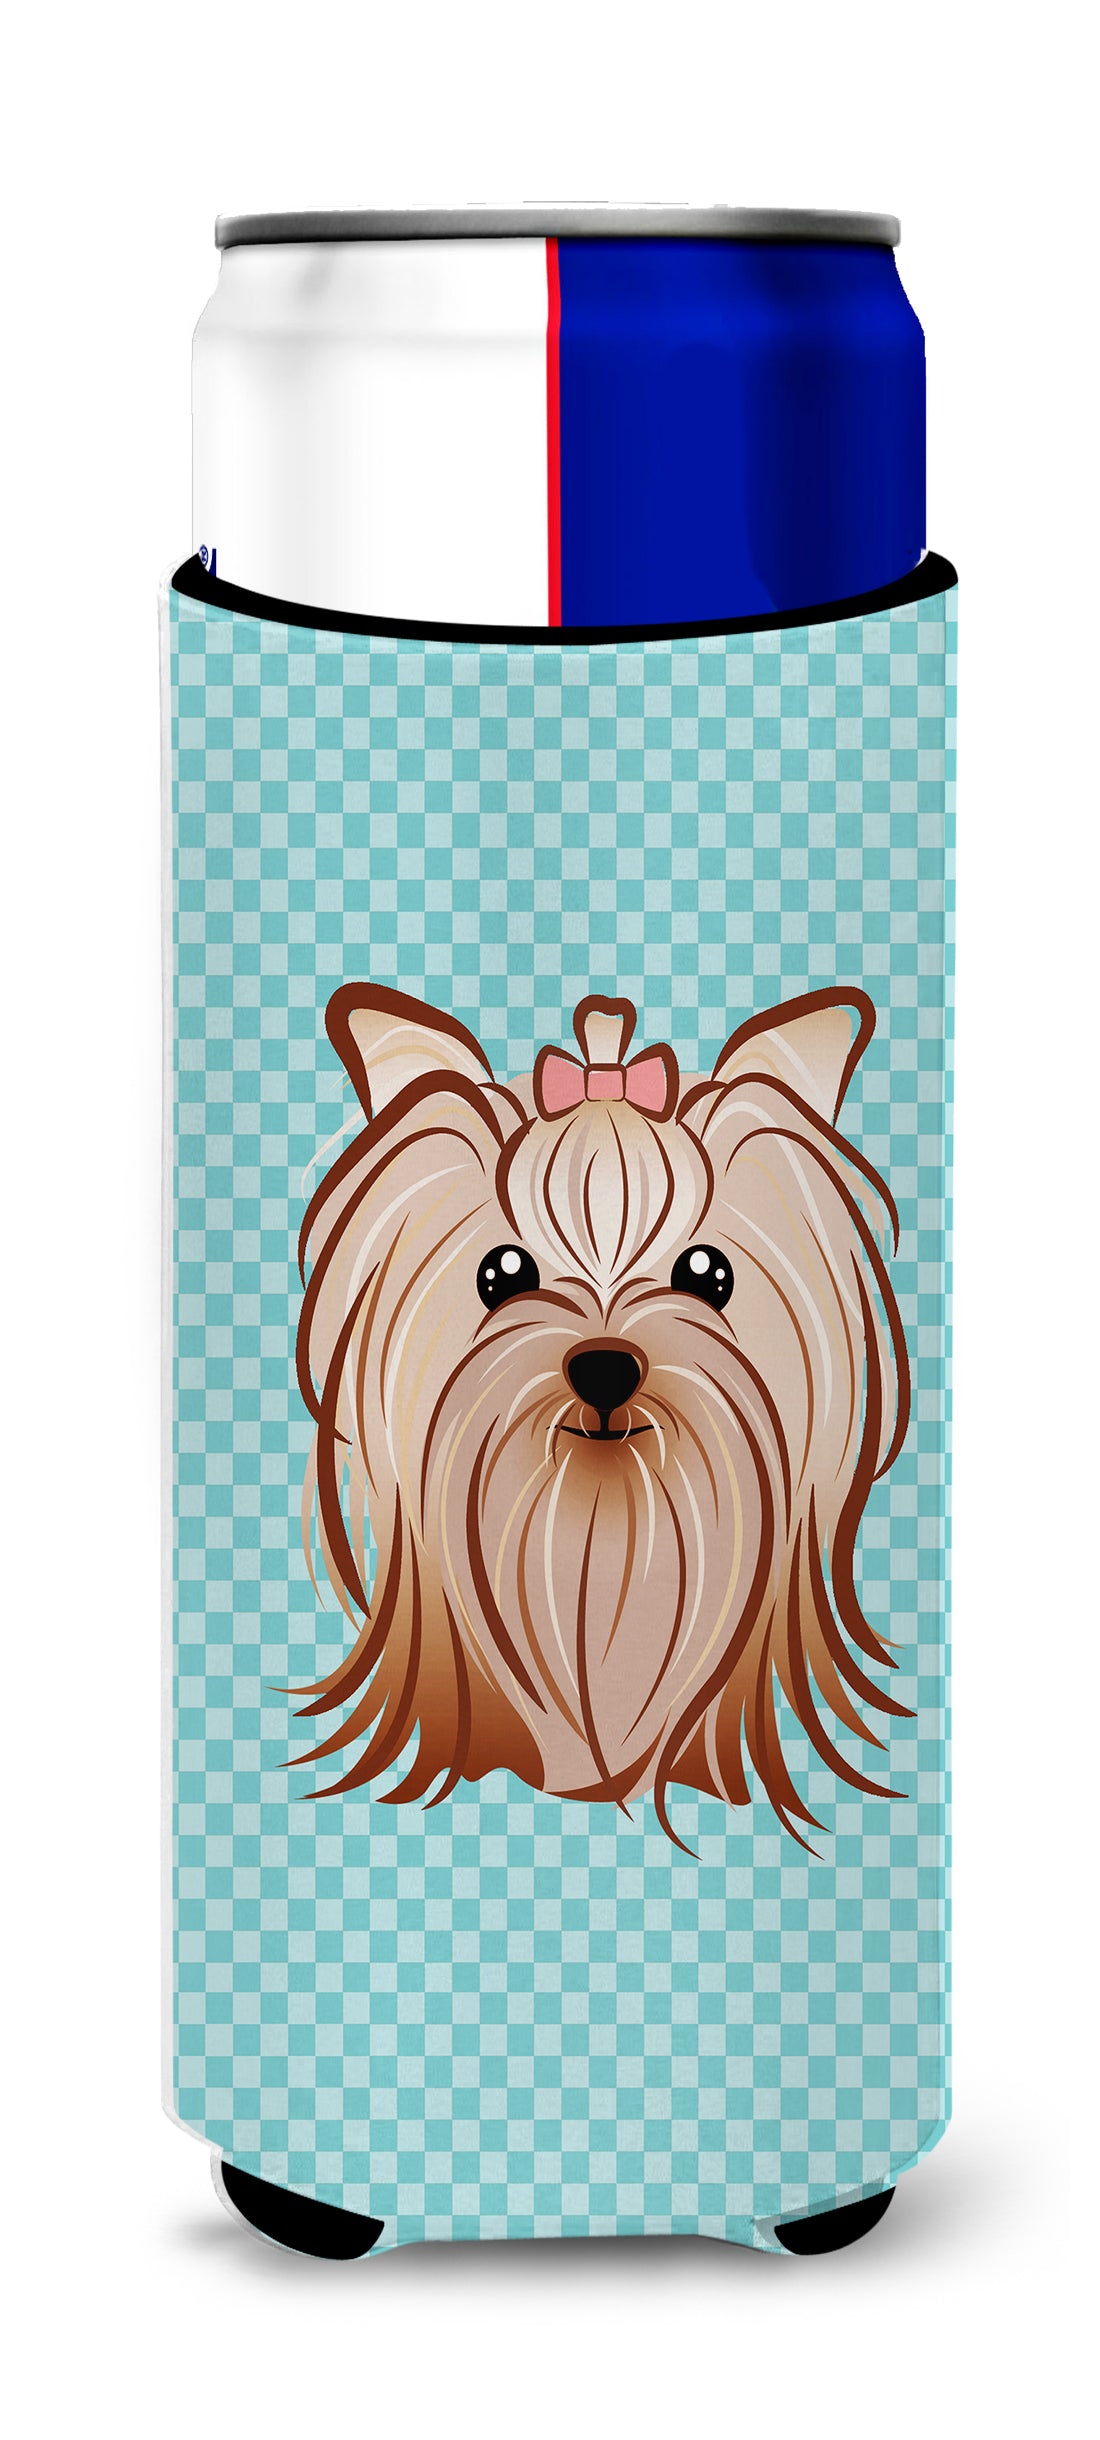 Checkerboard Blue Yorkie Yorkshire Terrier Ultra Beverage Insulators for slim cans.